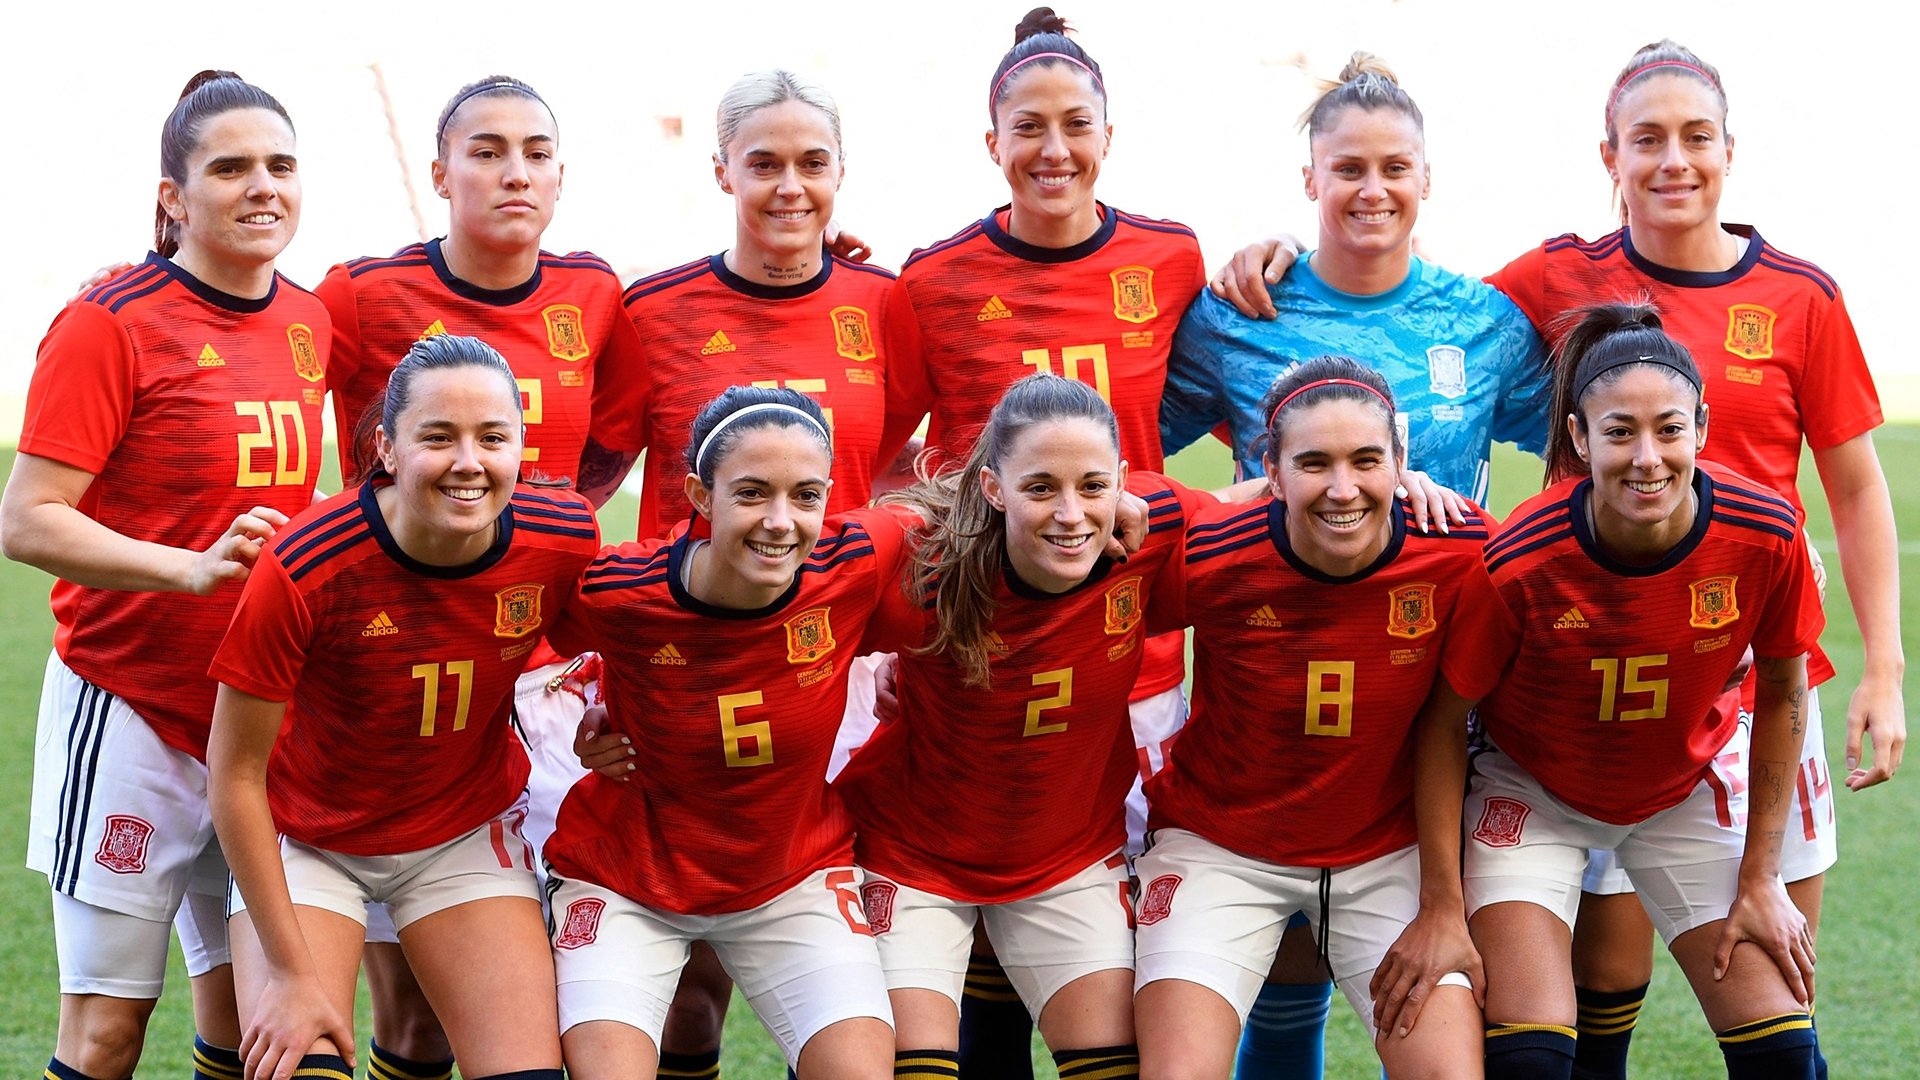 Spain are not favourites for the UEFA Women's Euros boasting Barcelona UWCL winners. Goal.com US